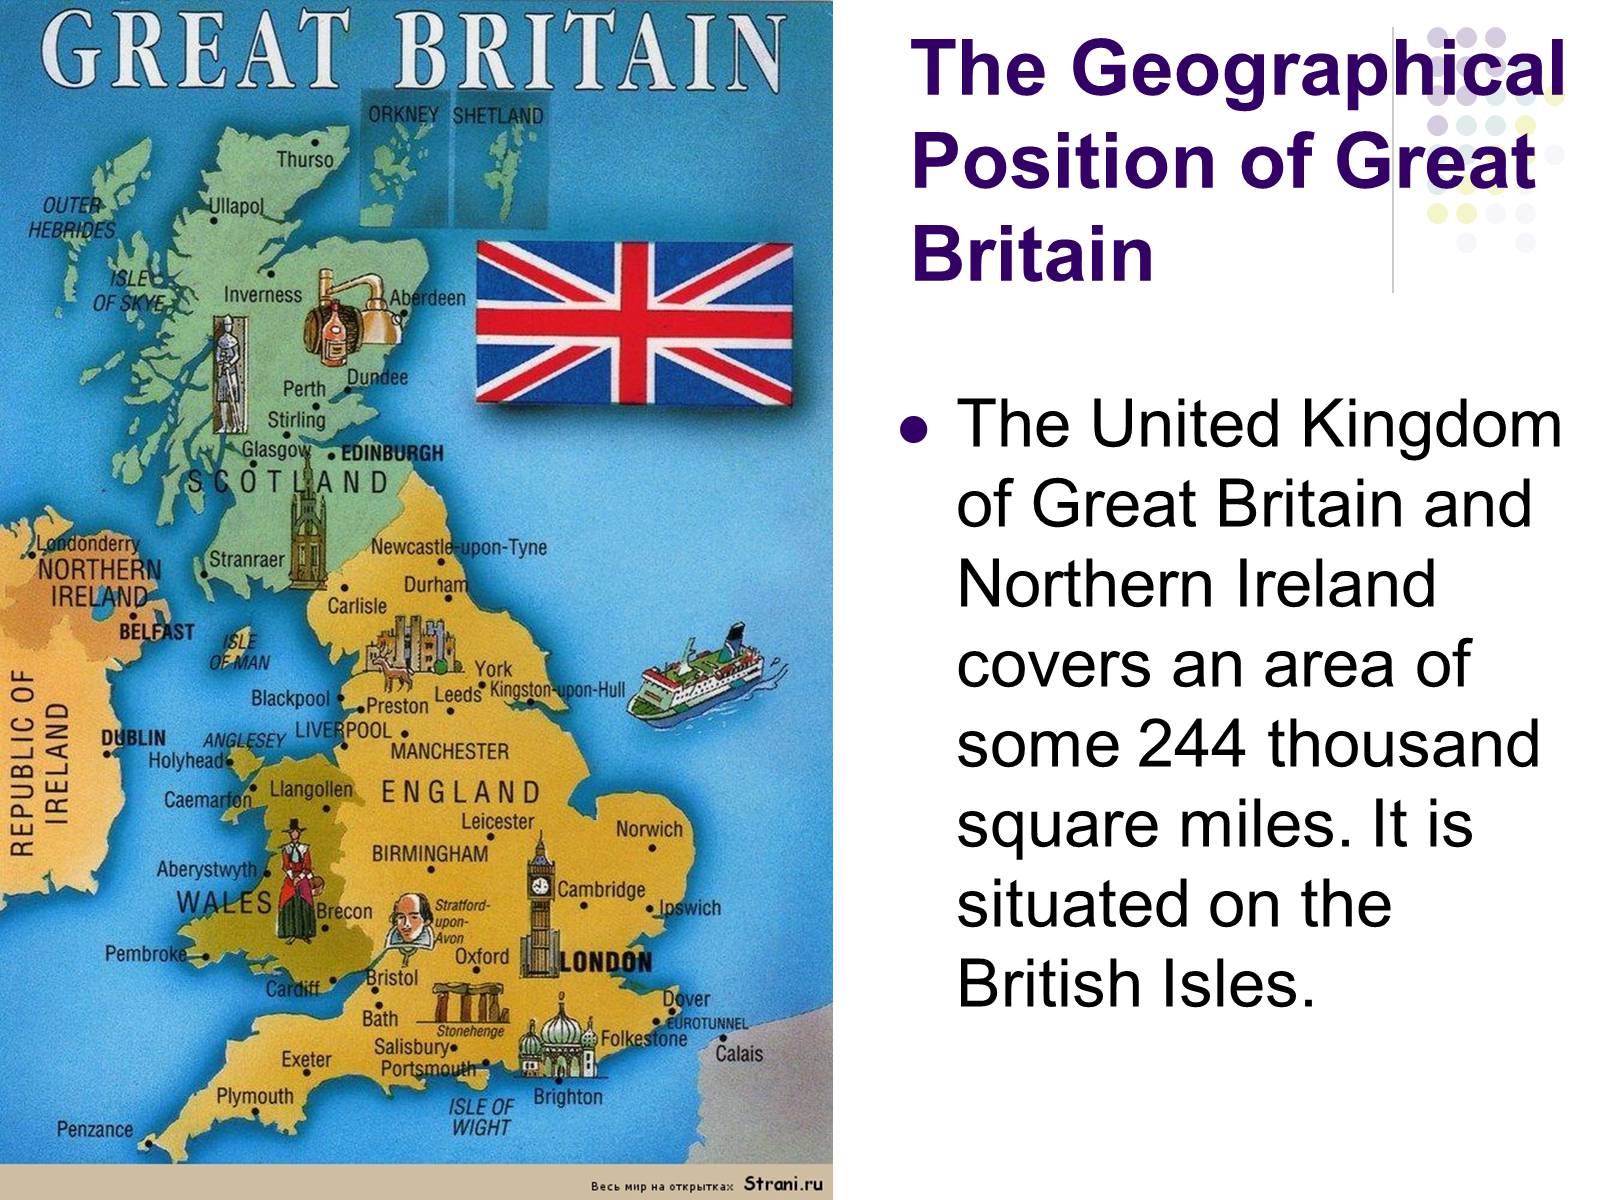 Is situated an islands. Geographical position of great Britain карта. The United Kingdom of great Britain карта. Geographical position of the uk. Карта great Britain and Northern Ireland.